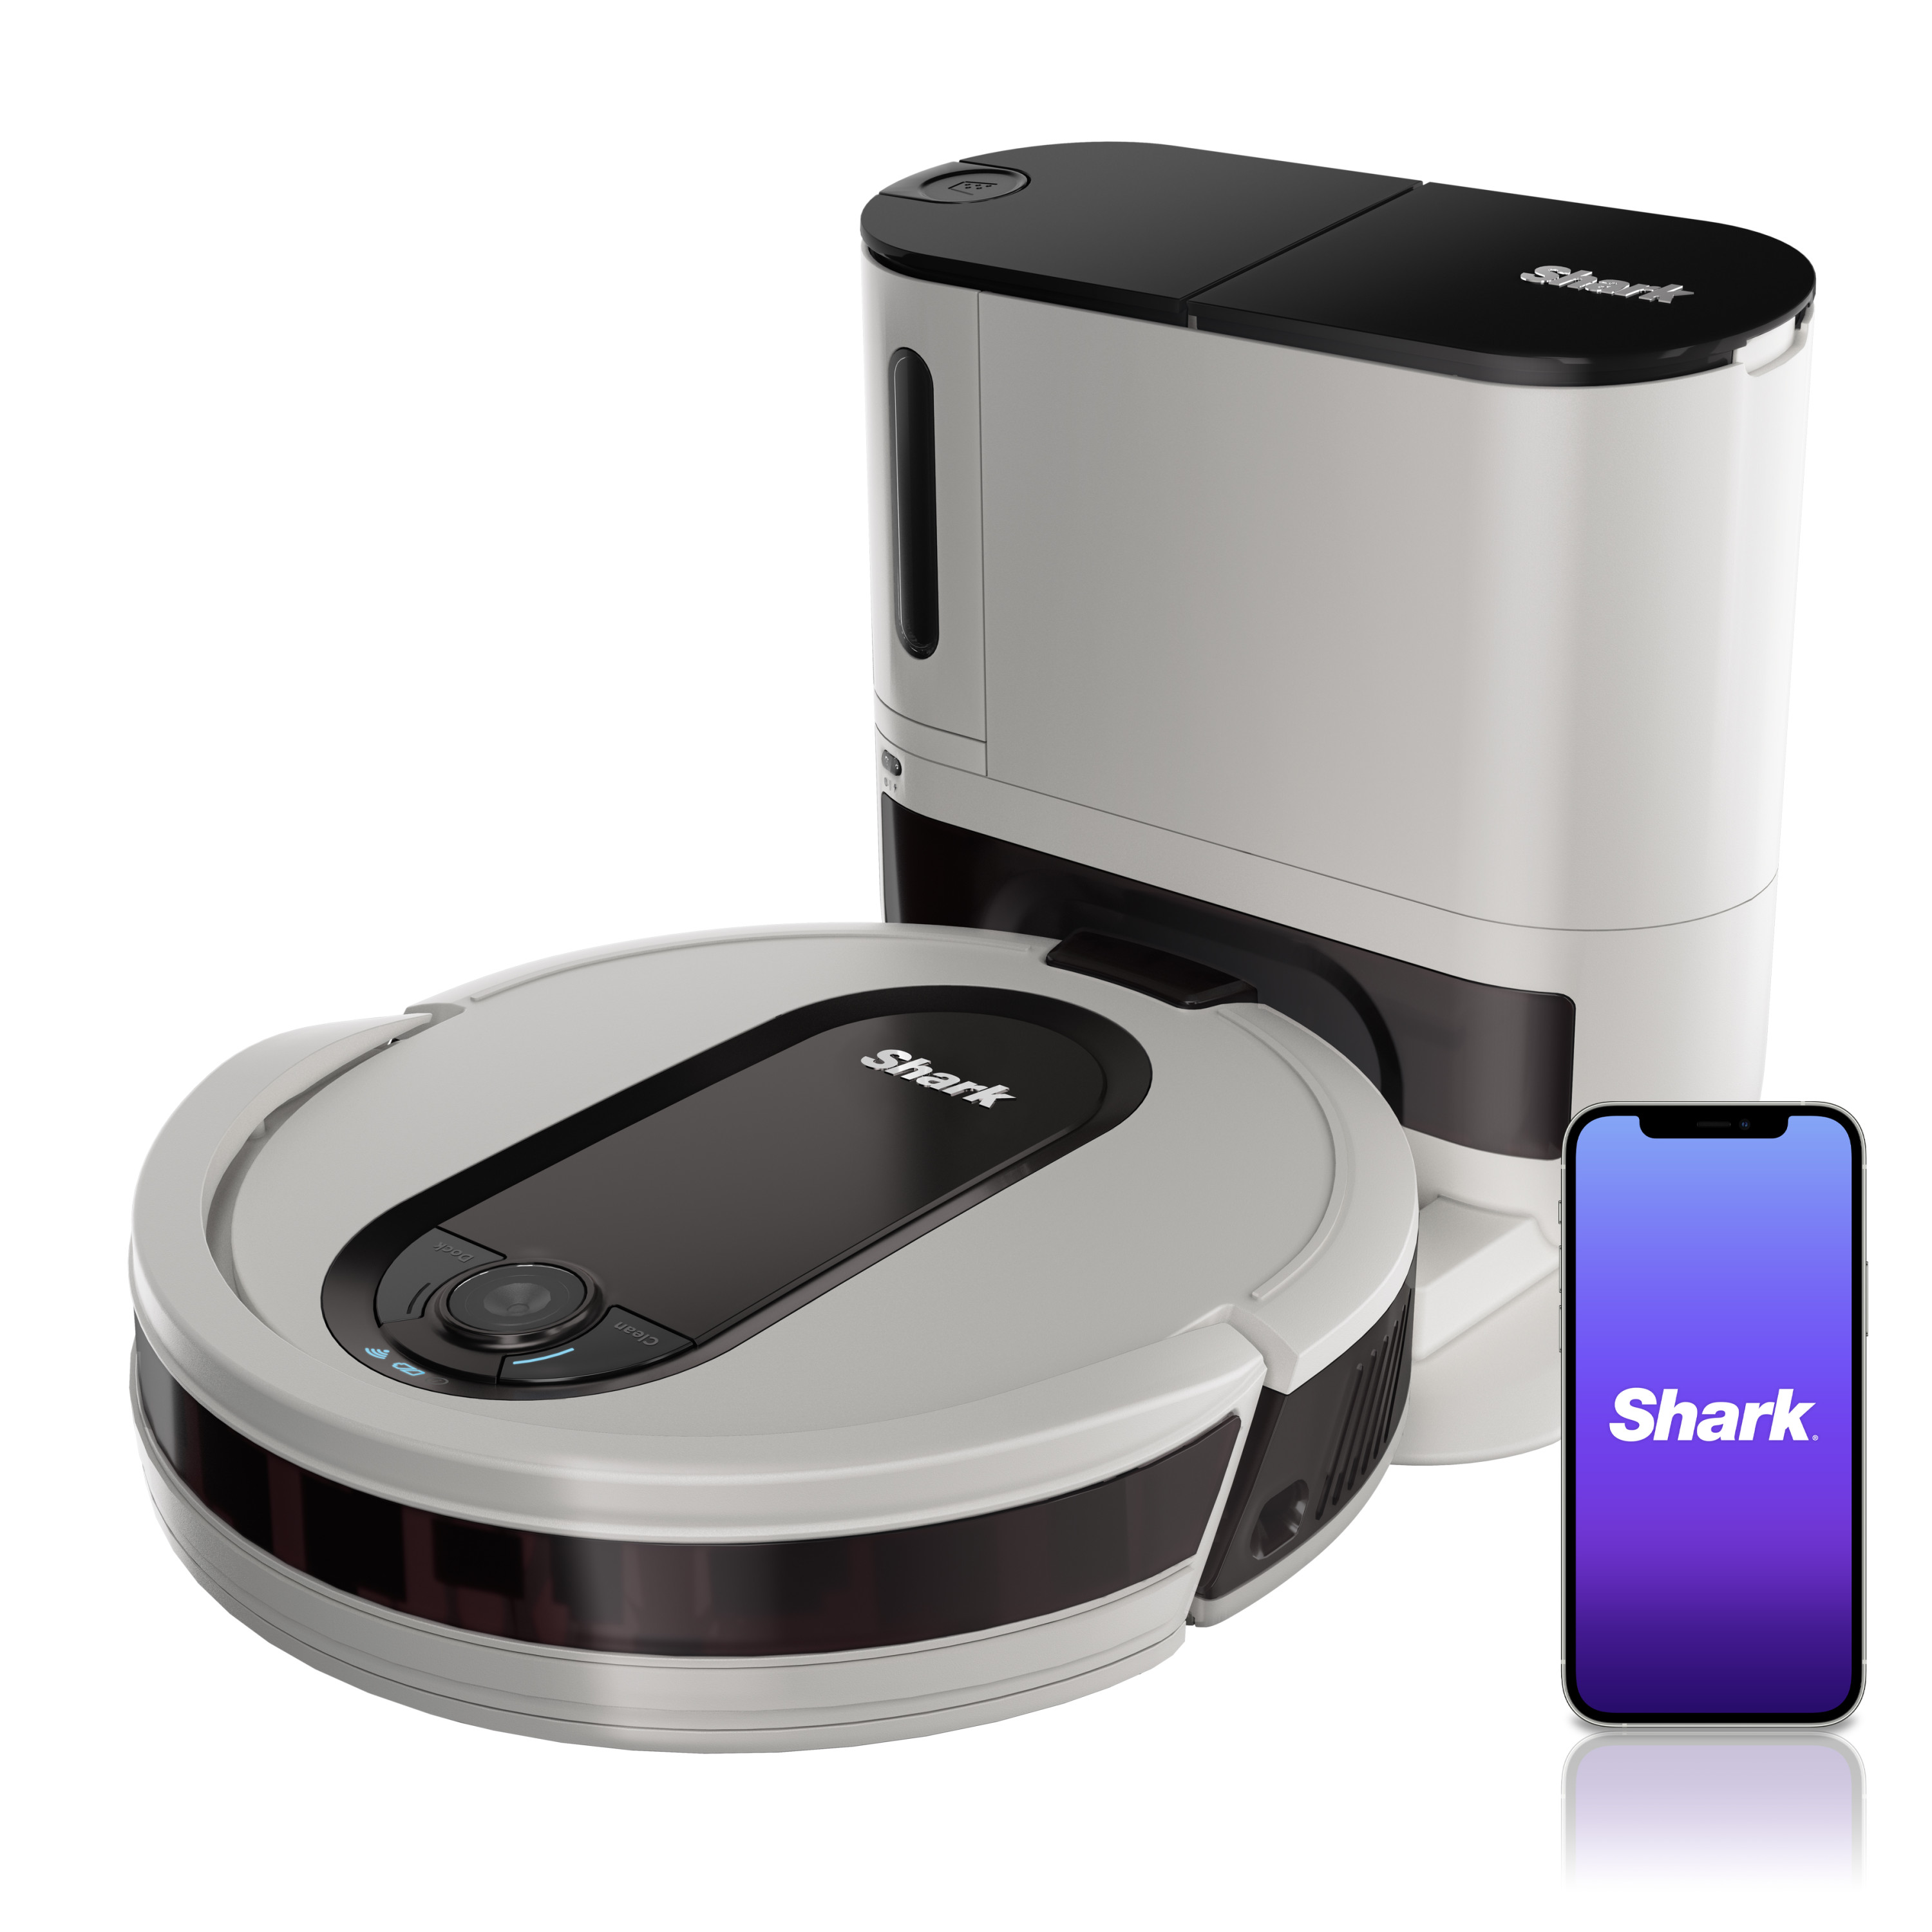 Shark EZ Robot Vacuum with Self-Empty Base, Bagless, Works with Google Assistant, White (RV913S) - image 1 of 6